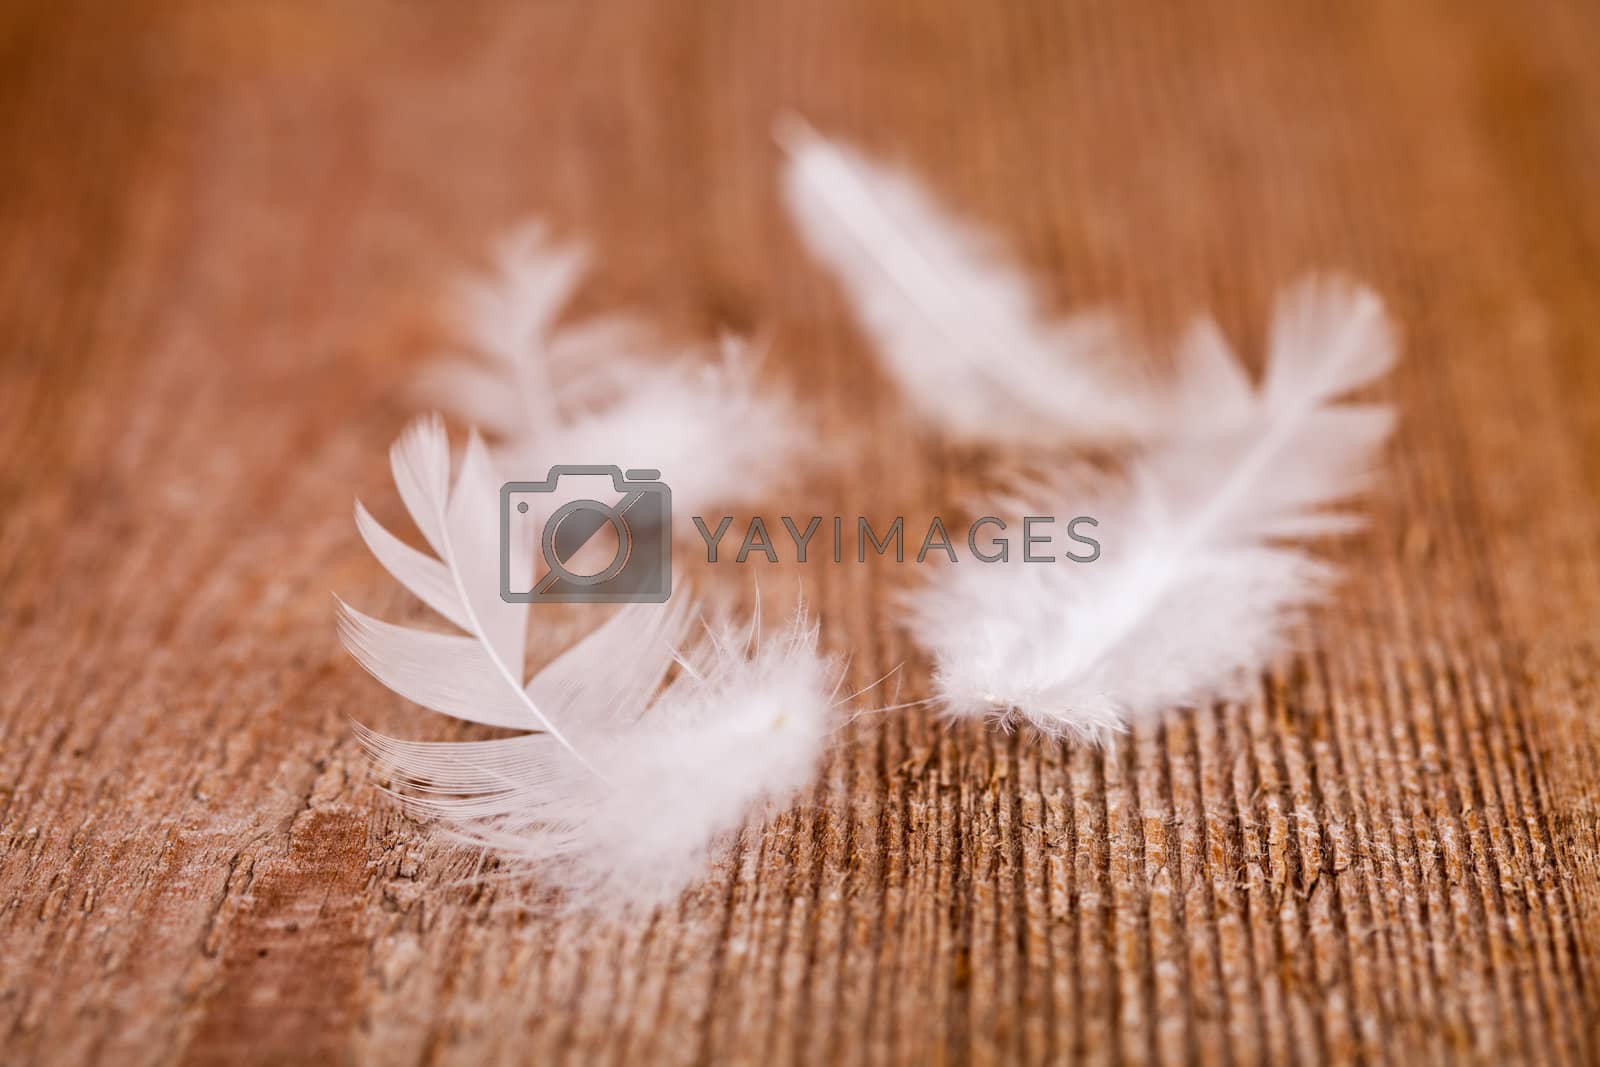 Royalty free image of white downy feathers  by marylooo